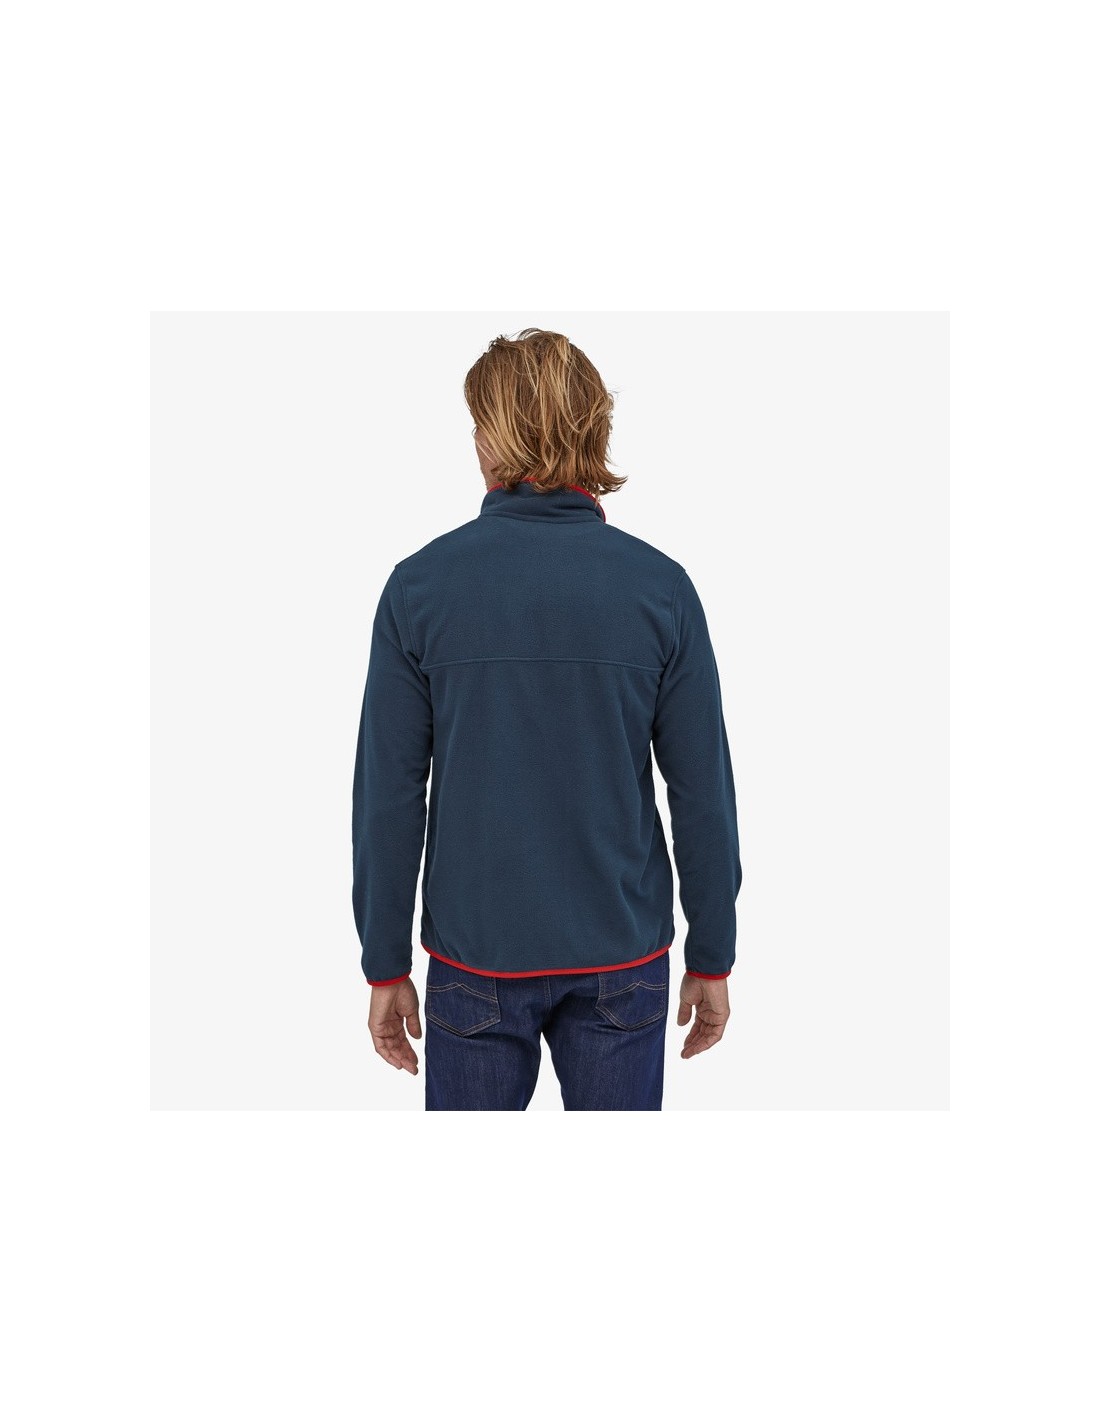 FORRO POLAR PATAGONIA M'S MICRO D® SNAP-T® HOMBRE